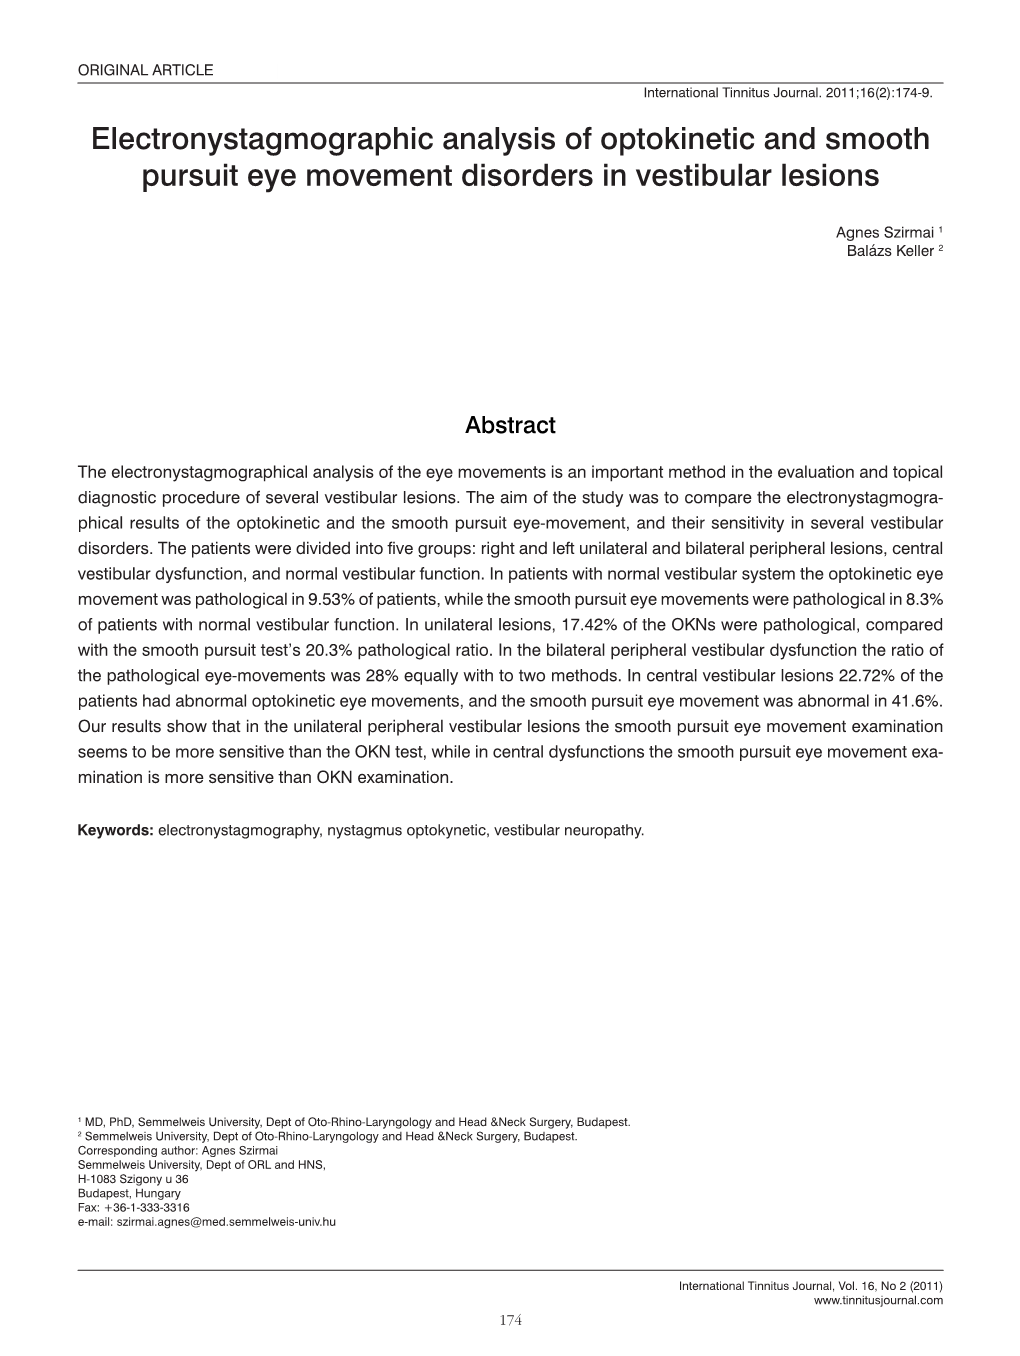 Electronystagmographic Analysis of Optokinetic and Smooth Pursuit Eye Movement Disorders in Vestibular Lesions